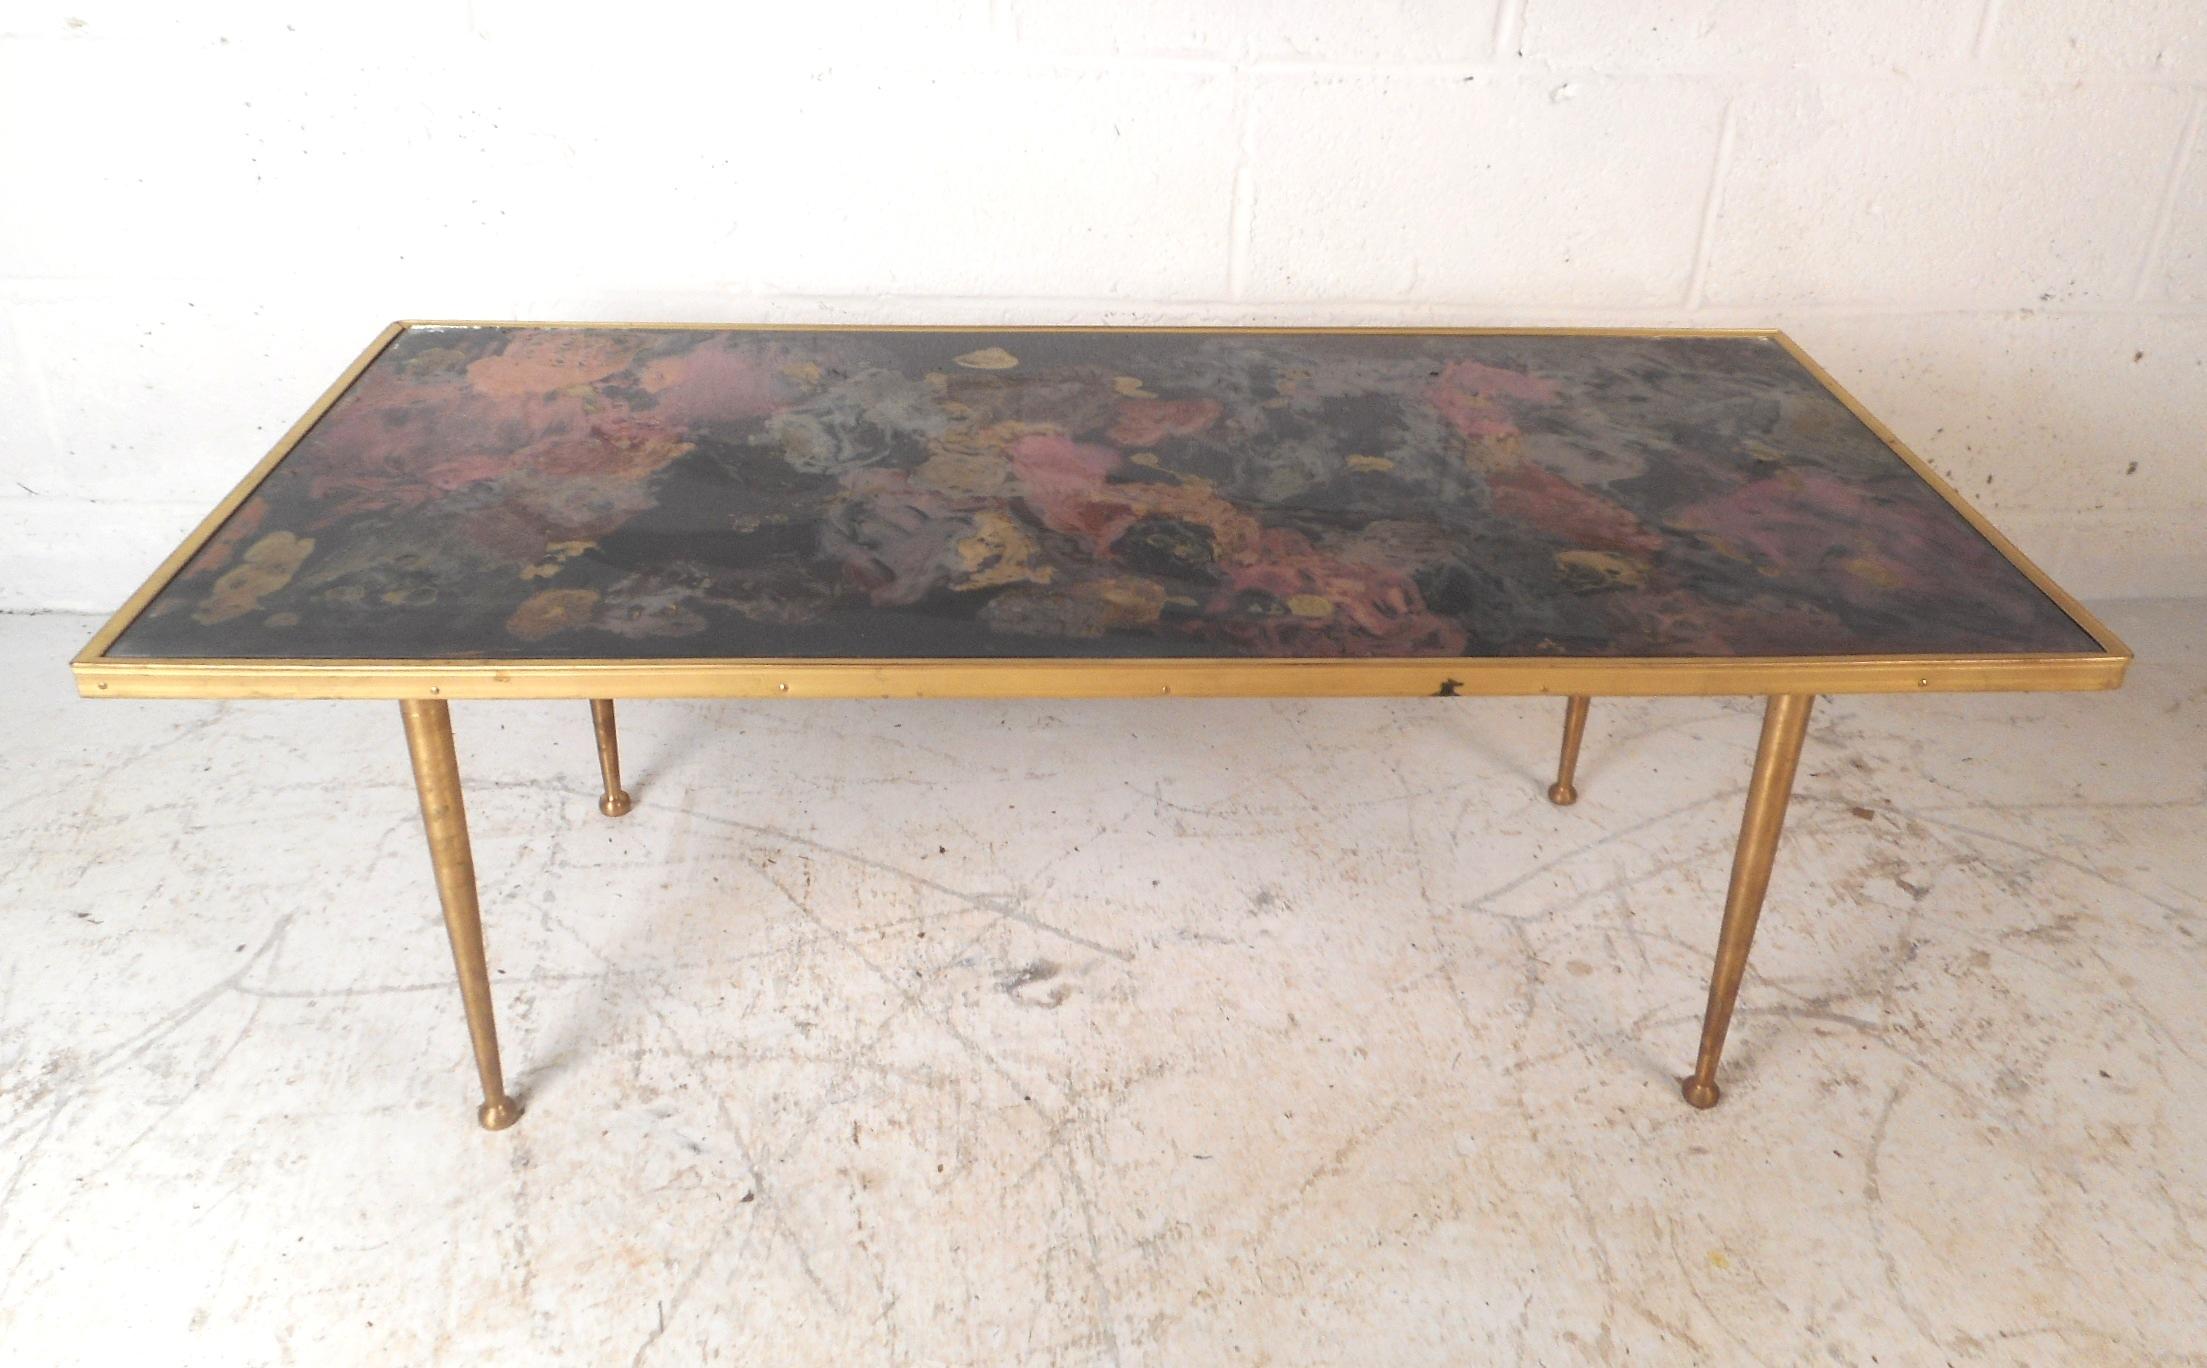 This stunning vintage modern coffee table features a colorful abstract painting on the top underneath a rectangular piece of glass. A sleek Italian design with brass trim along the sides and tapered brass legs with ball feet. An articulate piece